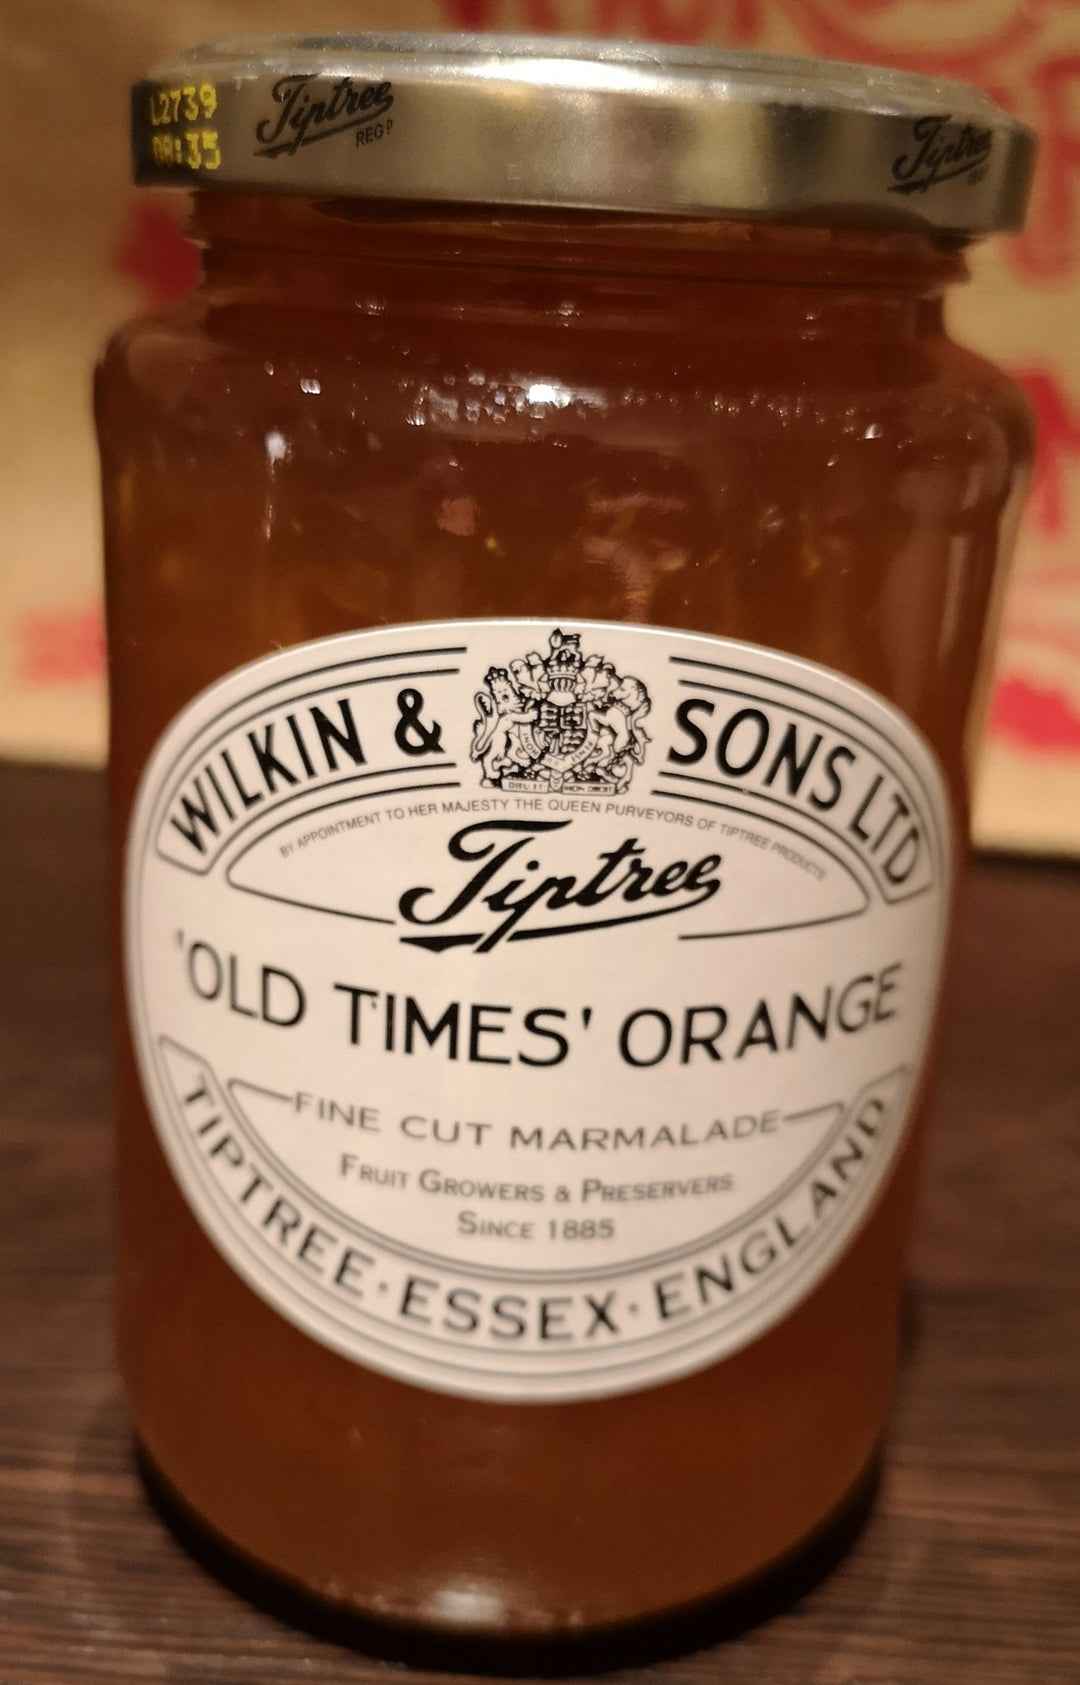 Old times orange Marmelade, Tiptree, Wilkin and Sons, 454 gr Glas - British Moments